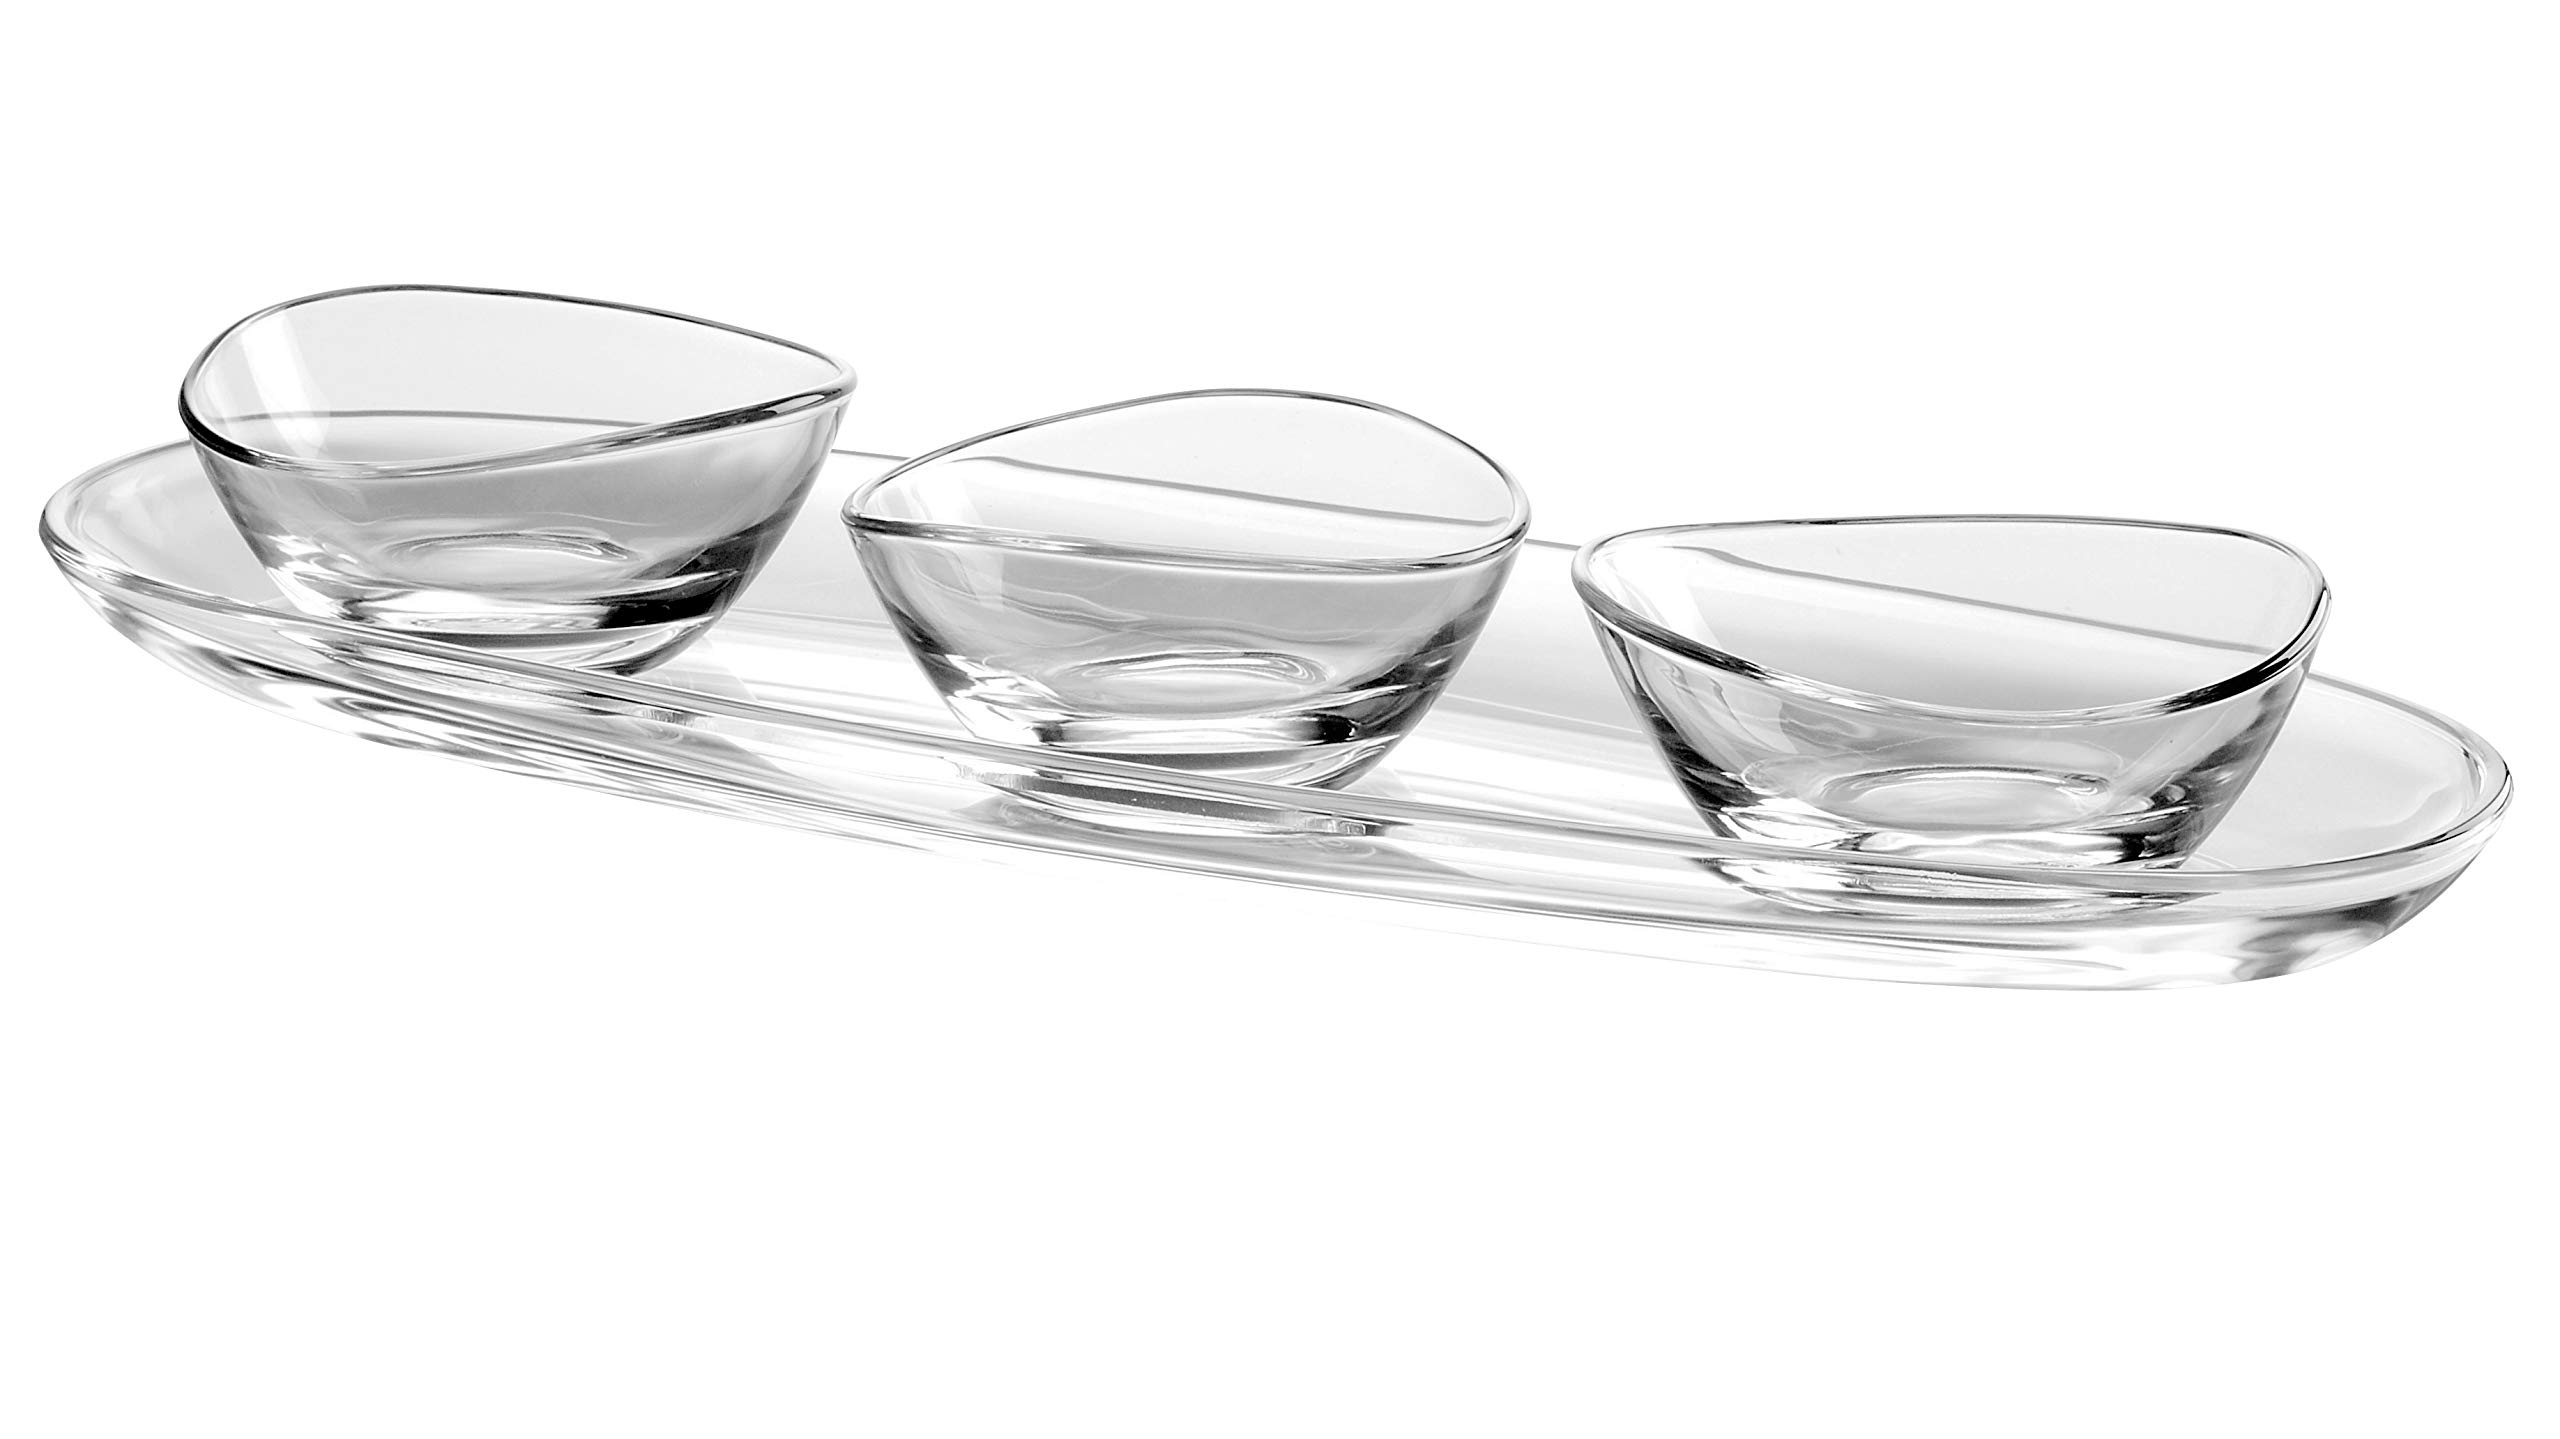 Barski - European Glass - Oval - Serving Tray - Platter - 19.5" Long - with Three Small Bowls - 5" Diameter - Could Be Used for Snack Server Or for Dips - 4 Piece Set - Made in Europe